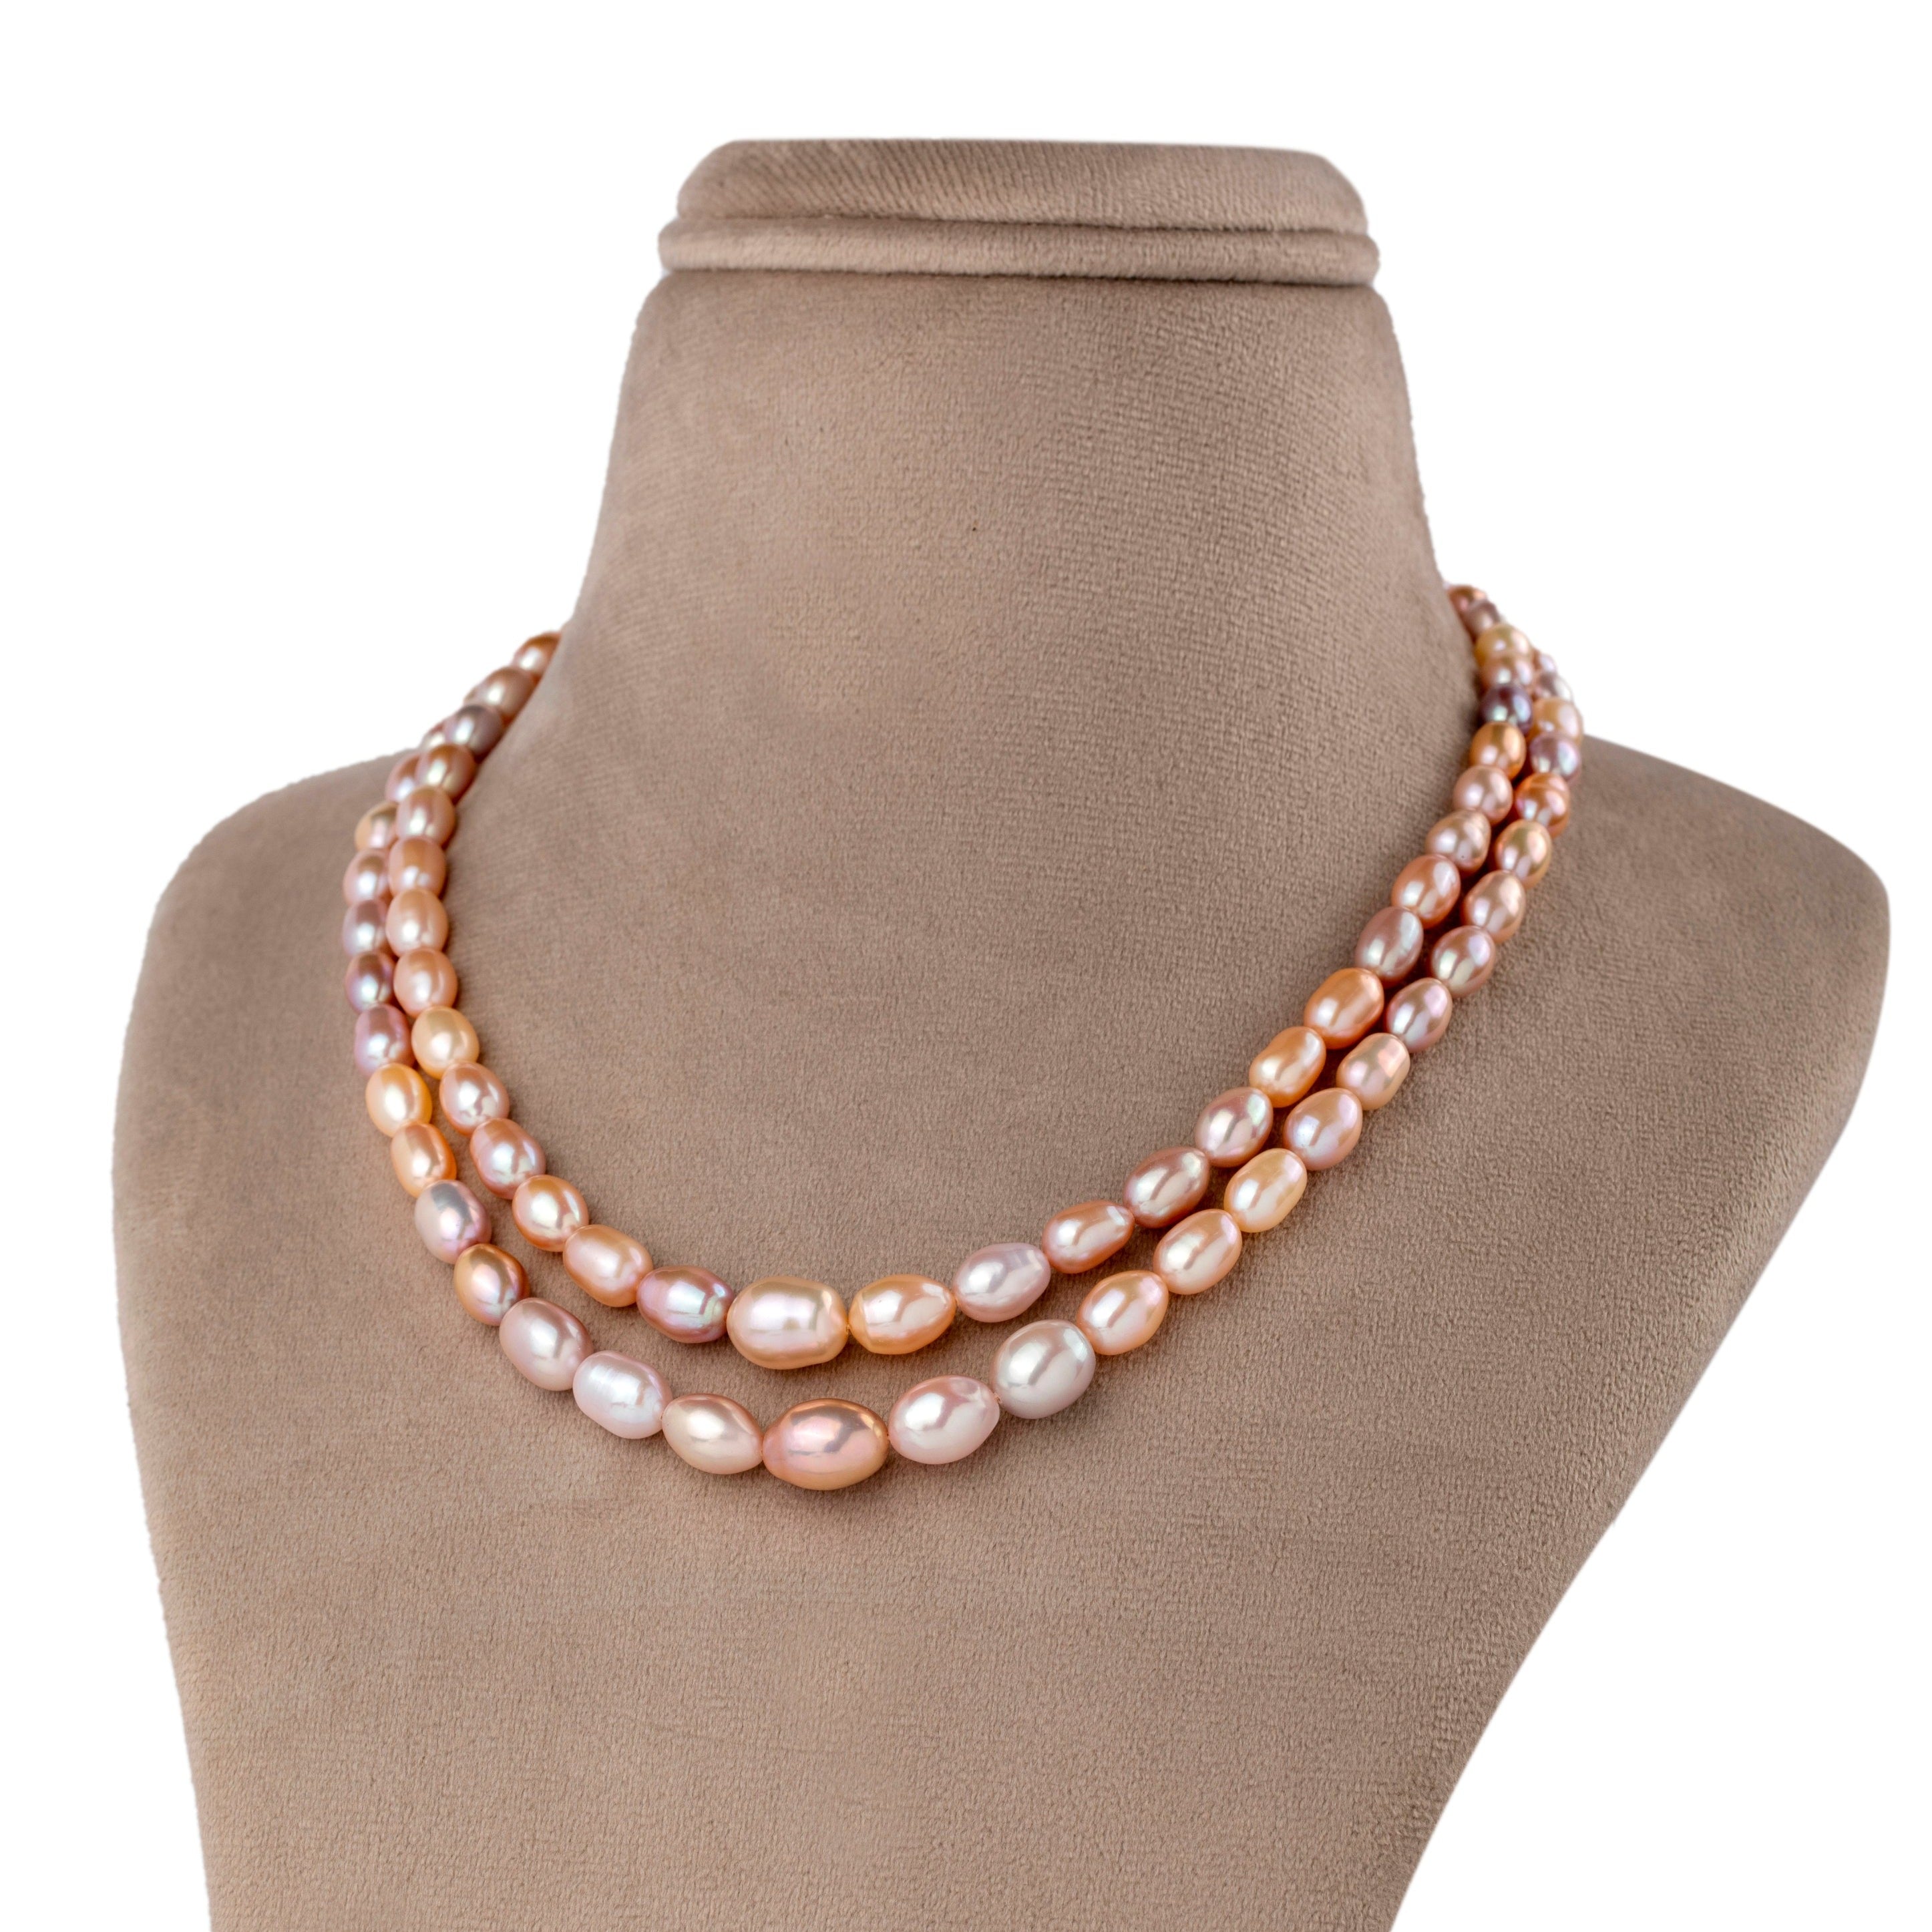 Blush Bouquet Freshwater Pearl Necklace